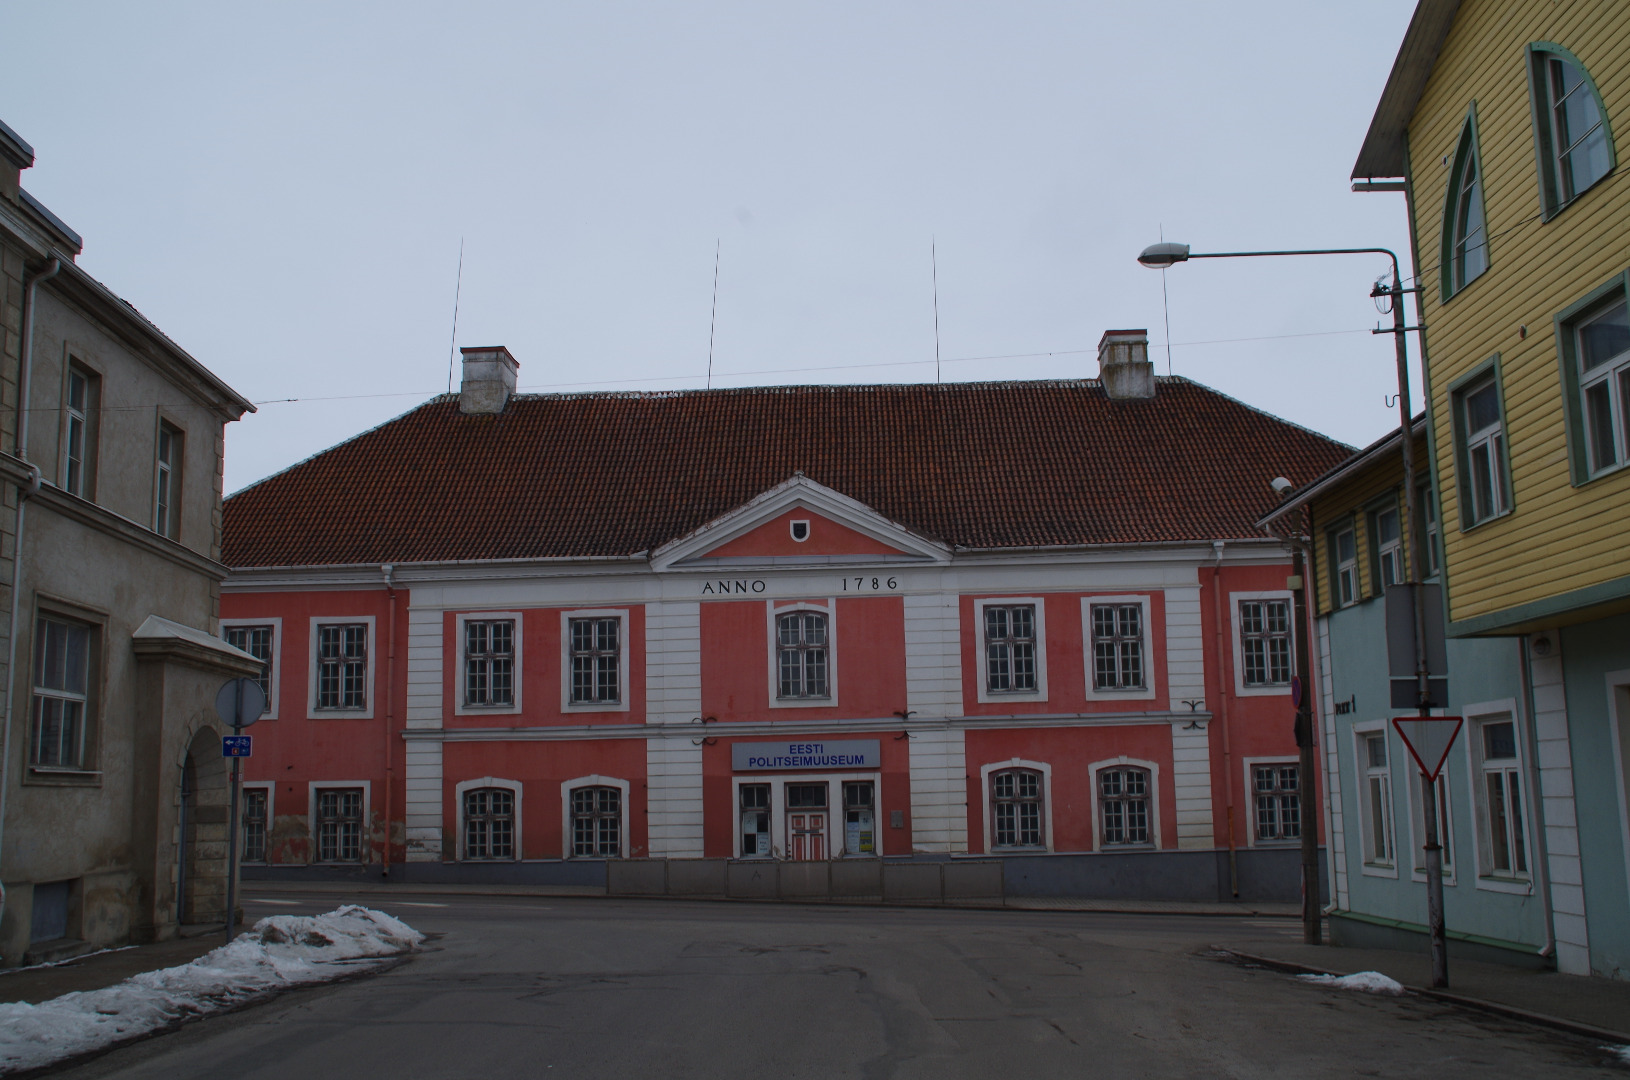 Former Municipality building in Rakvere at the crossing point of Tallinn Pika Street rephoto